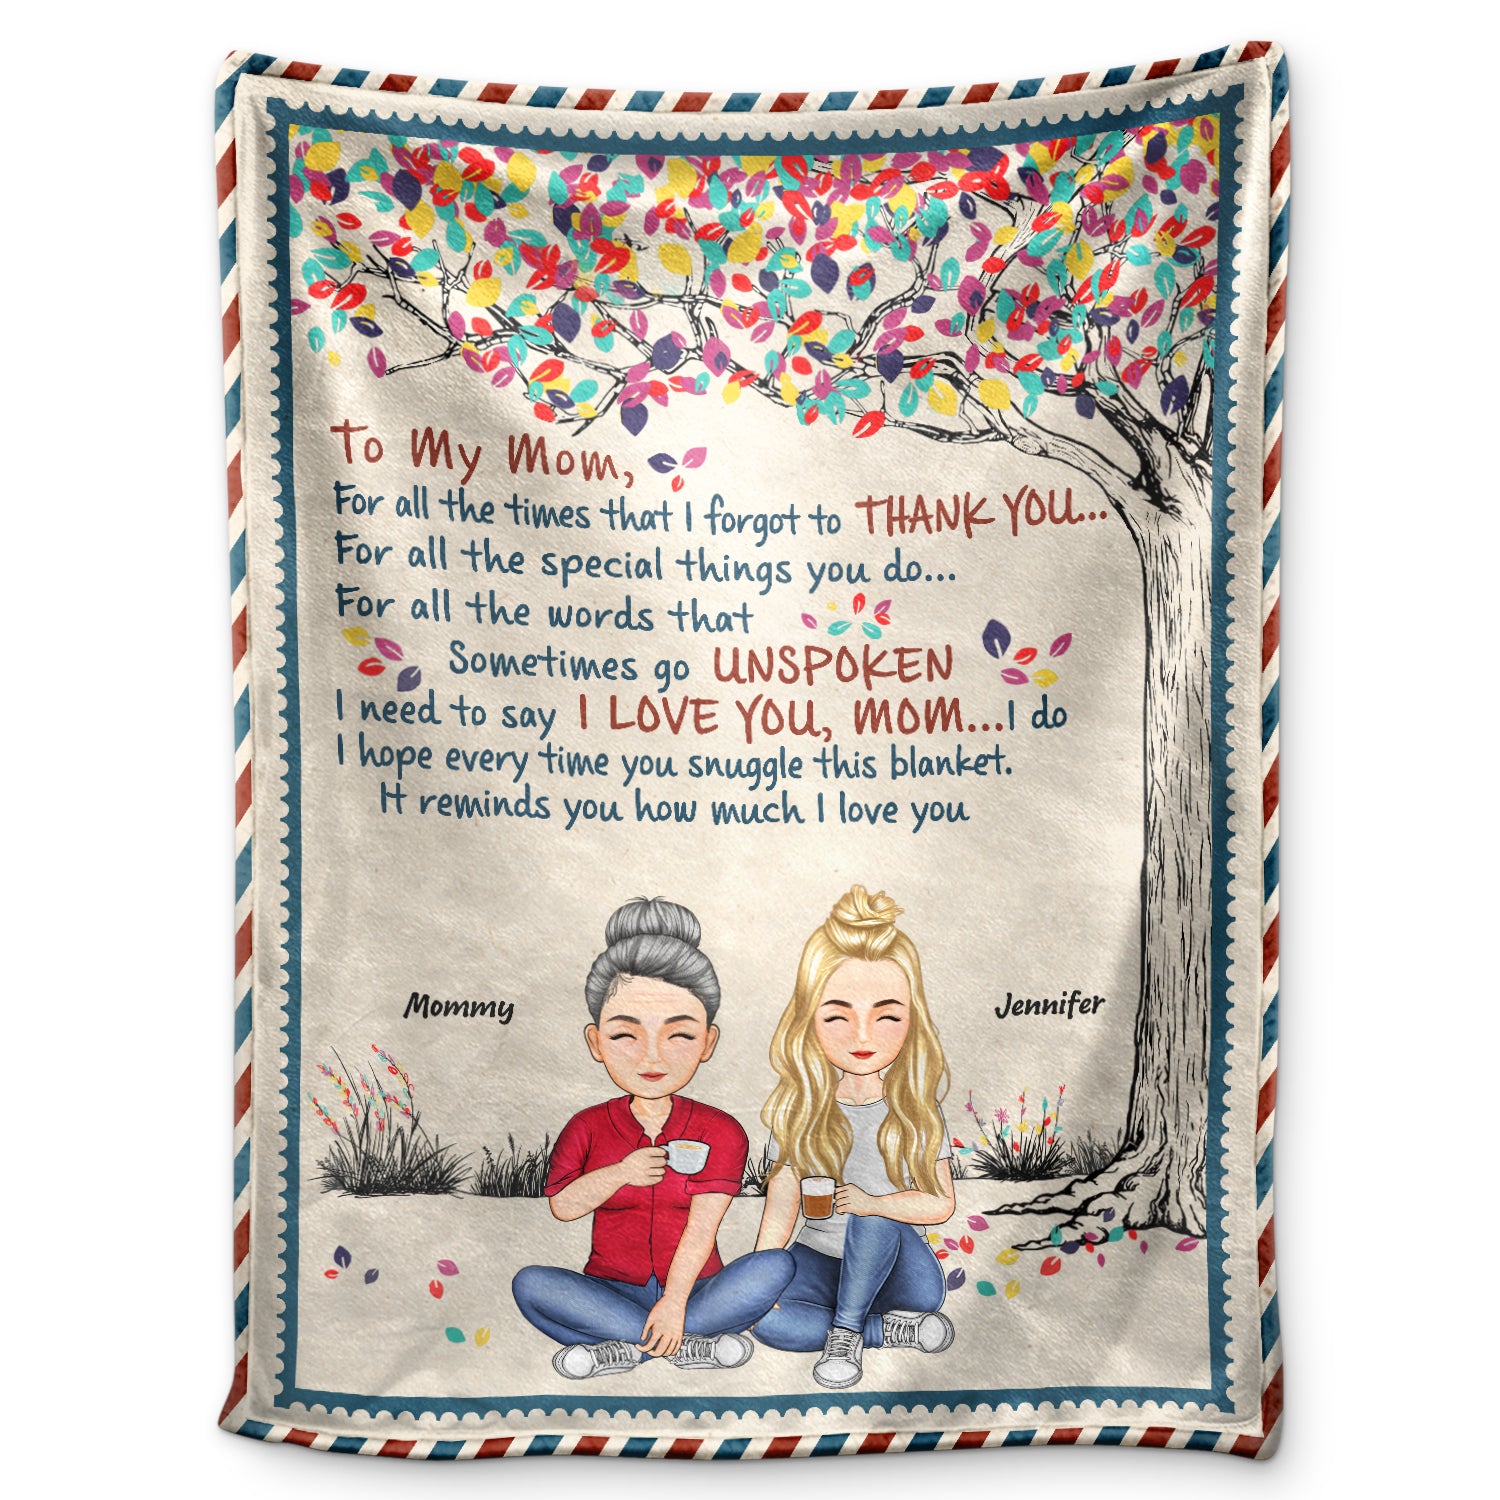 To My Mom For All The Times That I Forget To Thank You - Birthday, Loving Gift For Mommy, Mother, Grandma, Grandmother - Personalized Custom Fleece Blanket